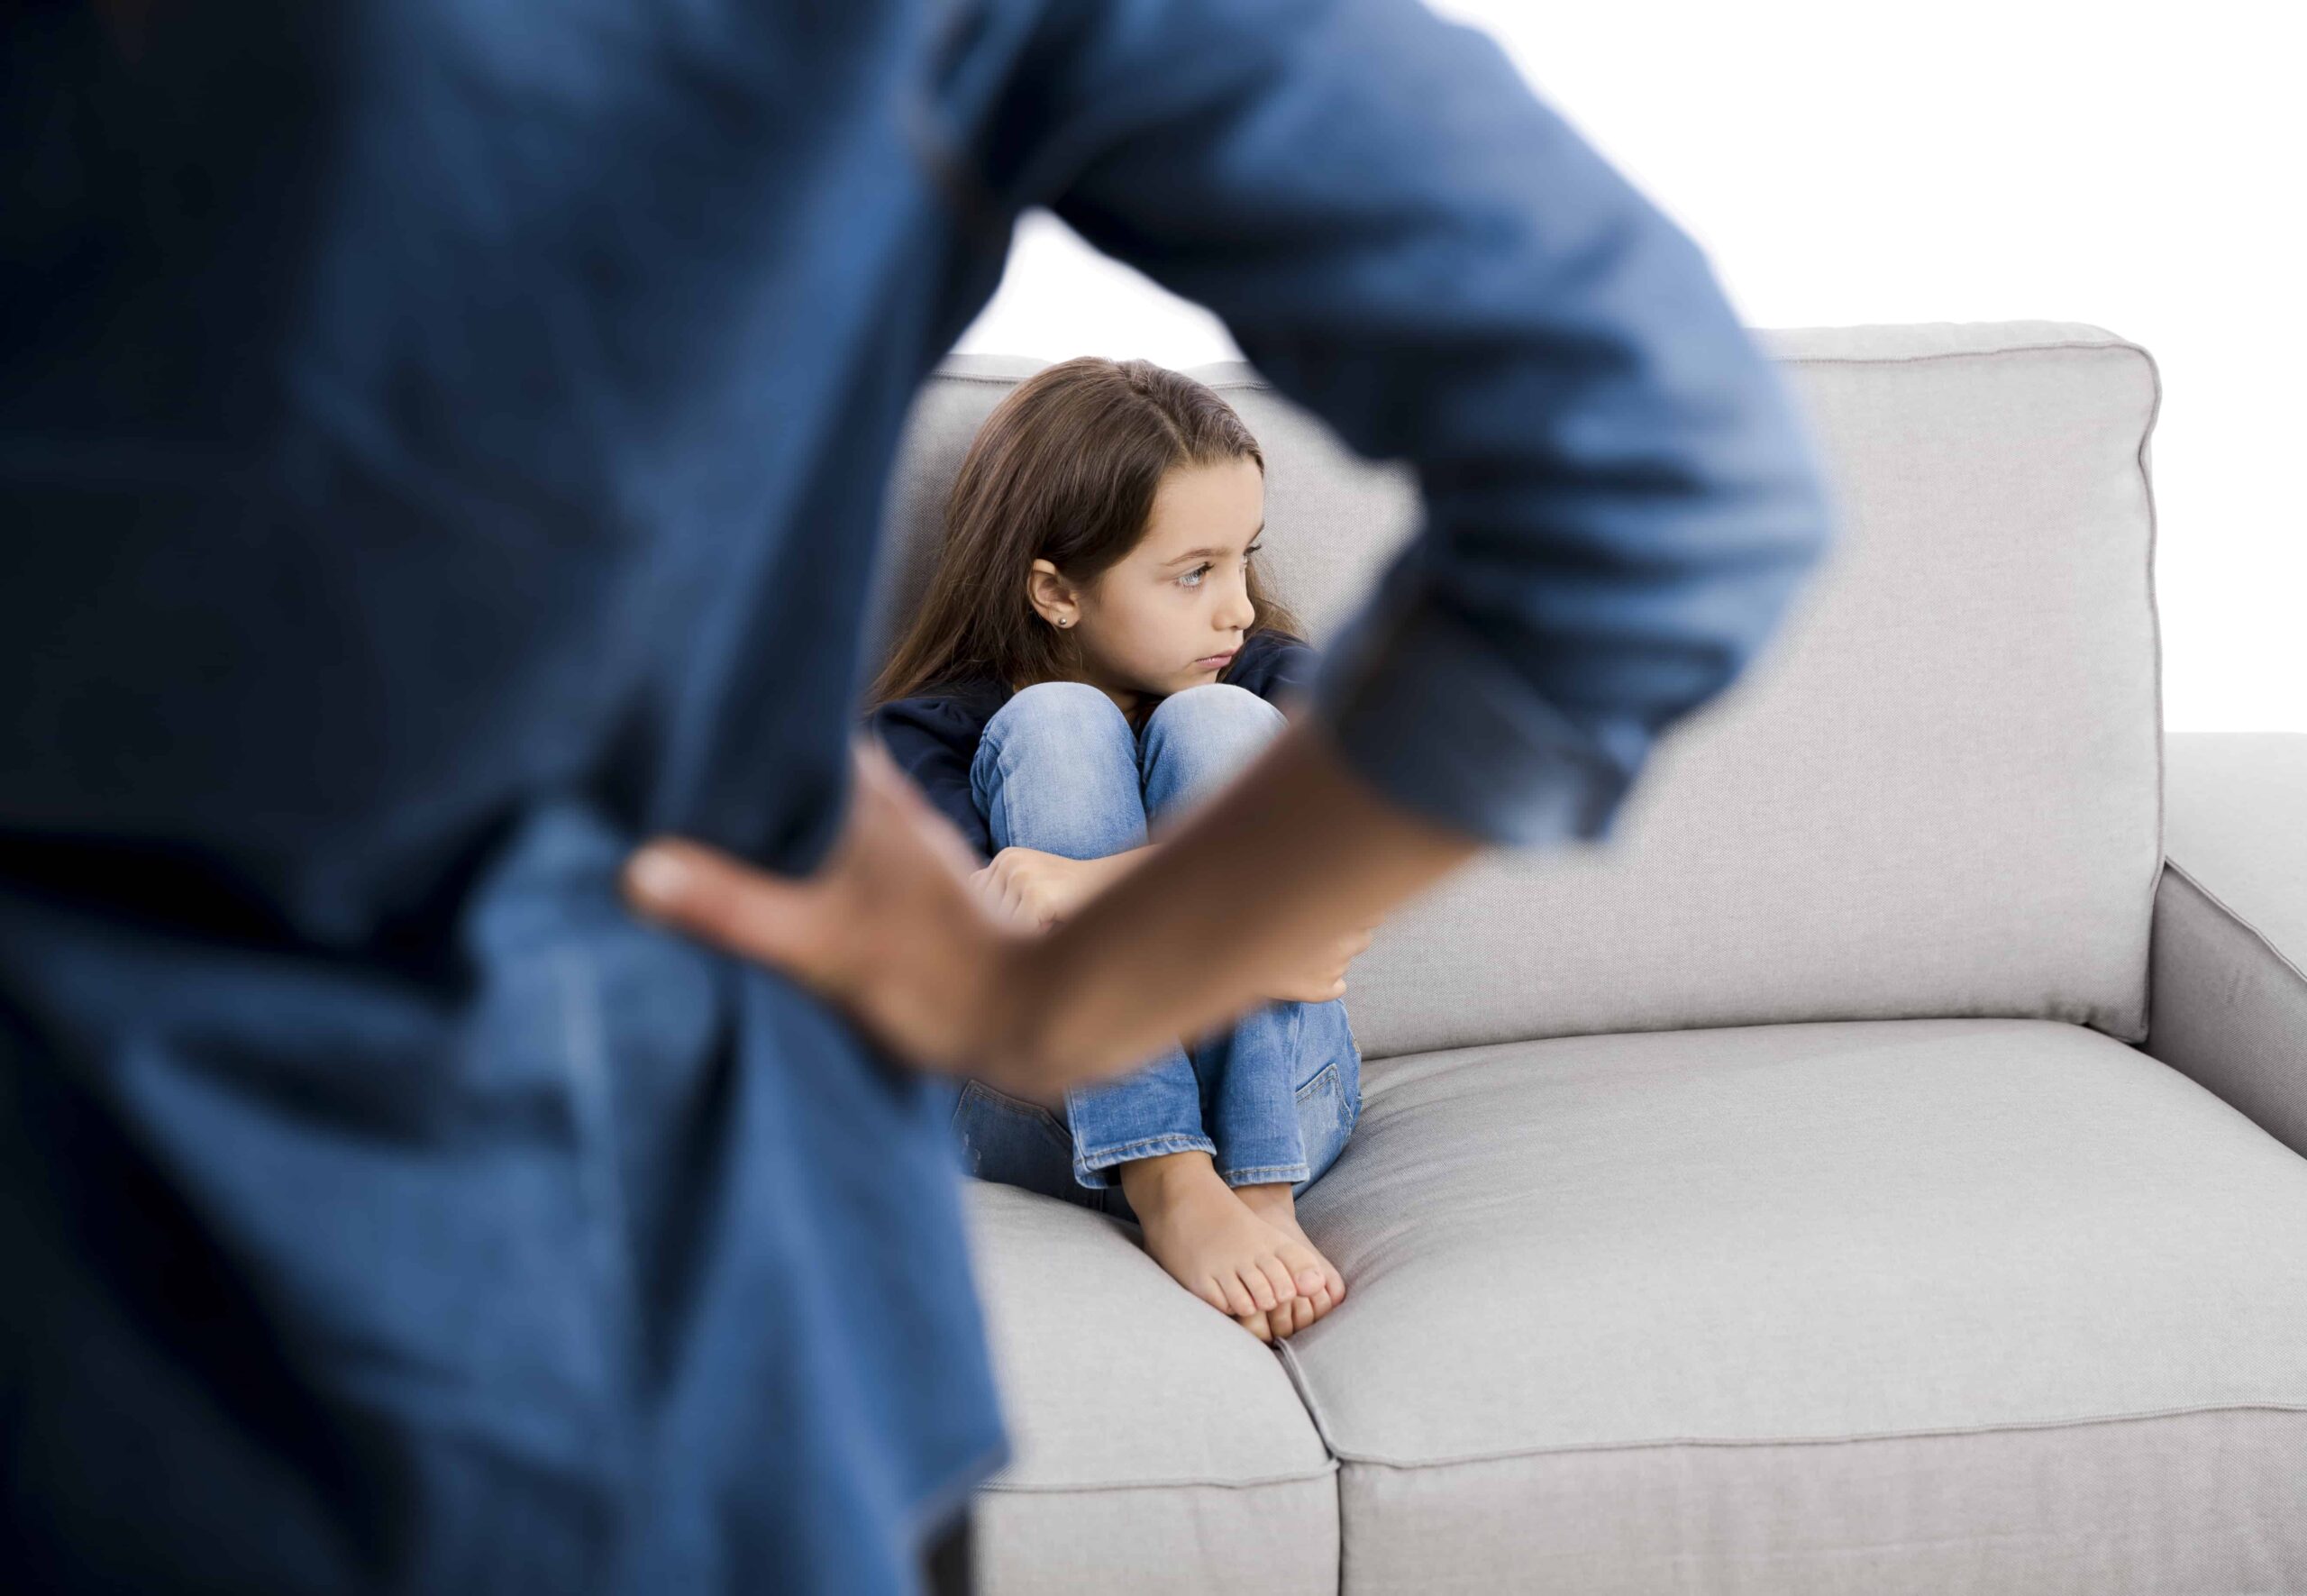 Why can’t you raise a child with strictness? What does harsh parenting lead to?